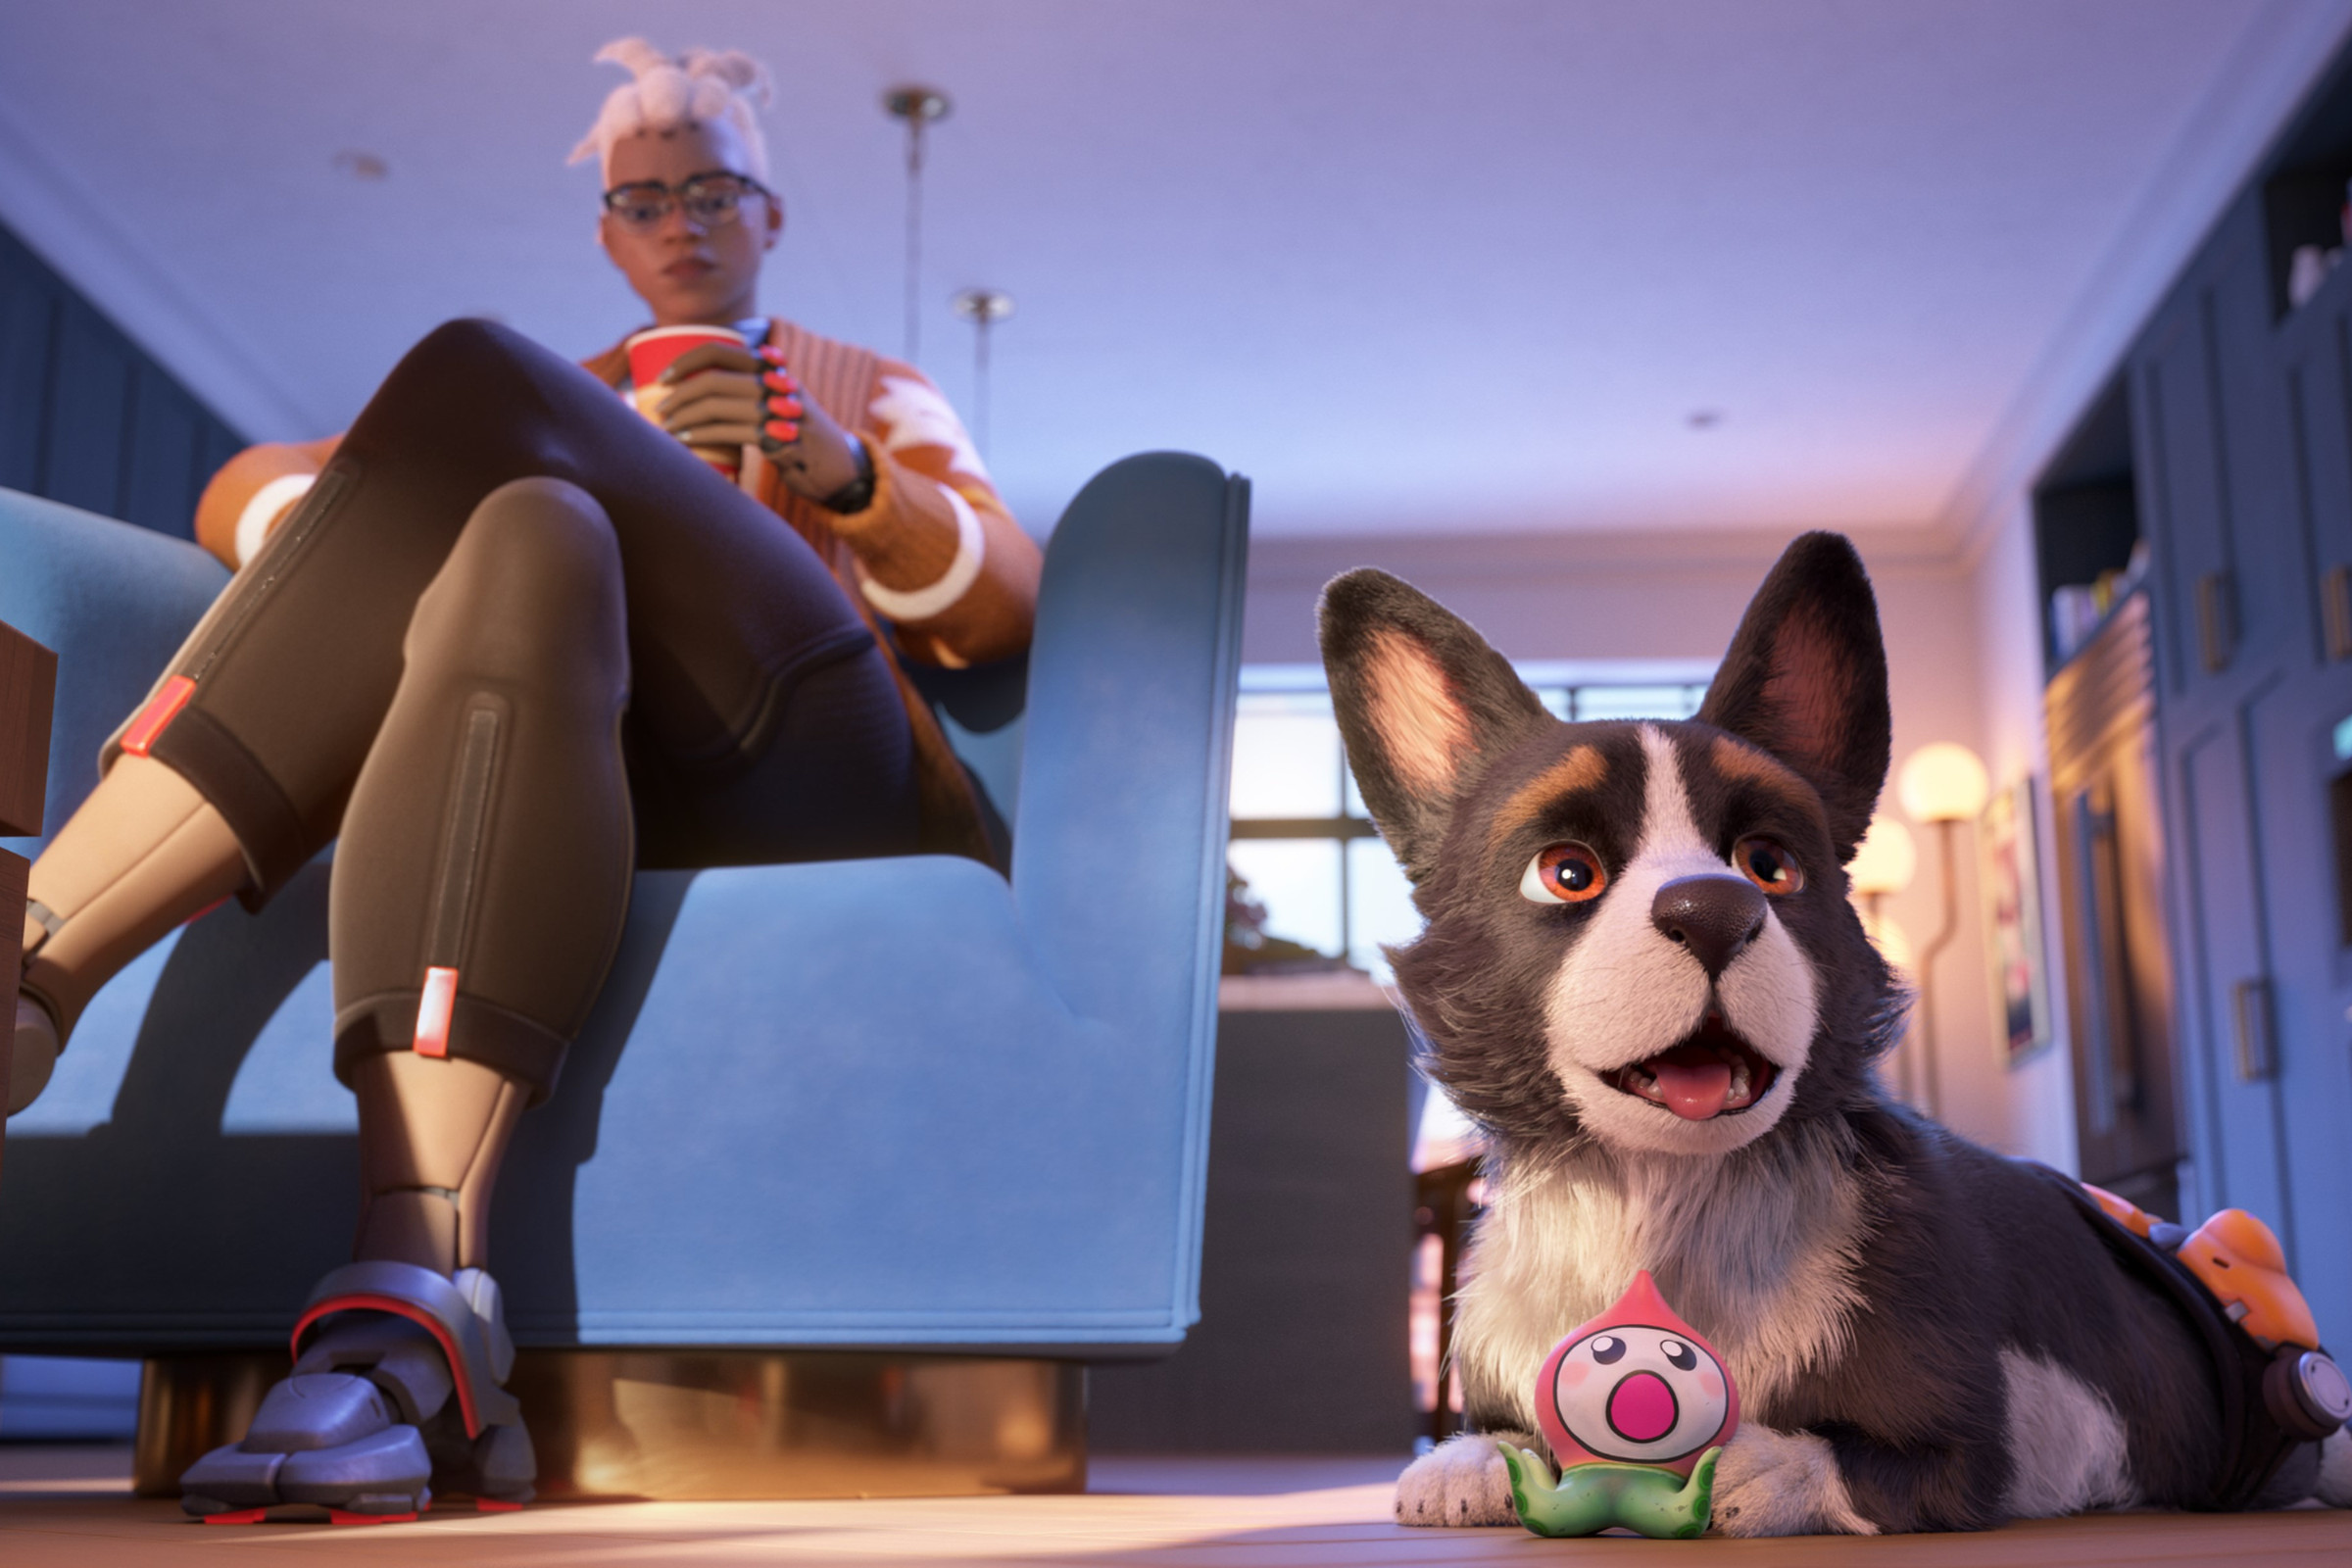 Screenshot from the Calling cinematic featuring Sojourn and her corgi Murphy